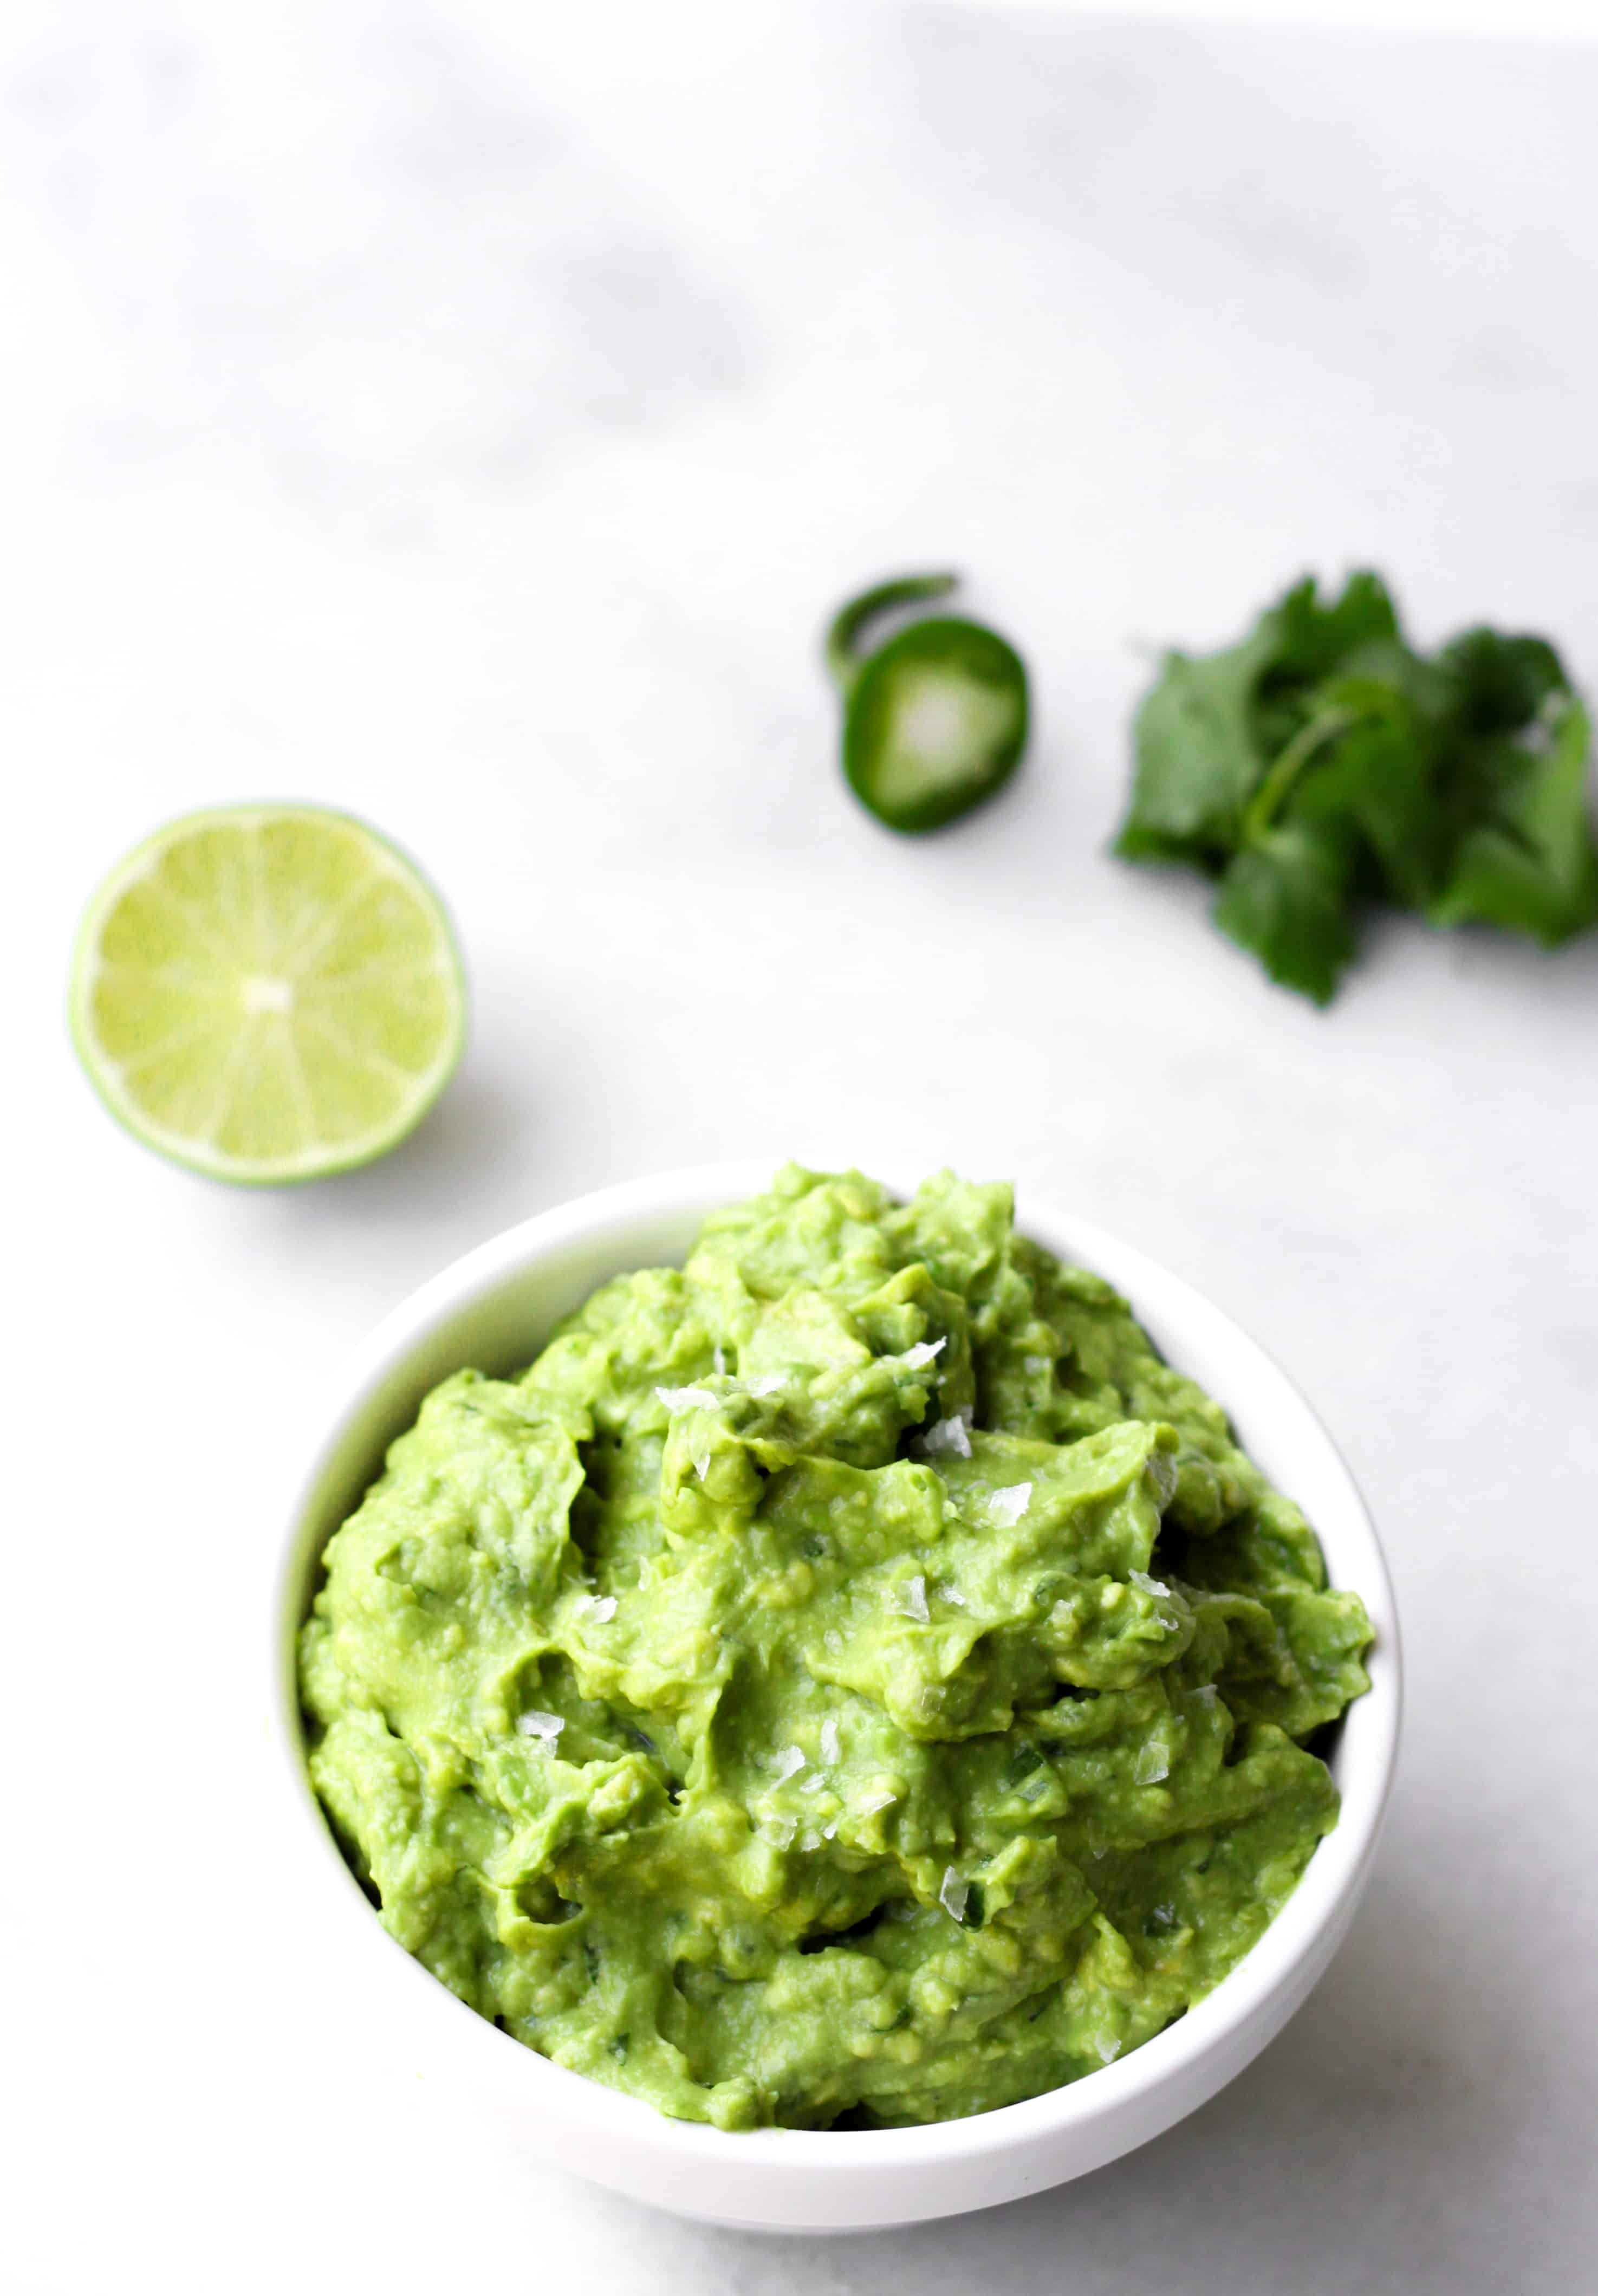 5 Minute Guacamole - It doesn't take a lot to bring out the best in avocado. This recipe is super simple and delicious! | www.accordingtoelle.com